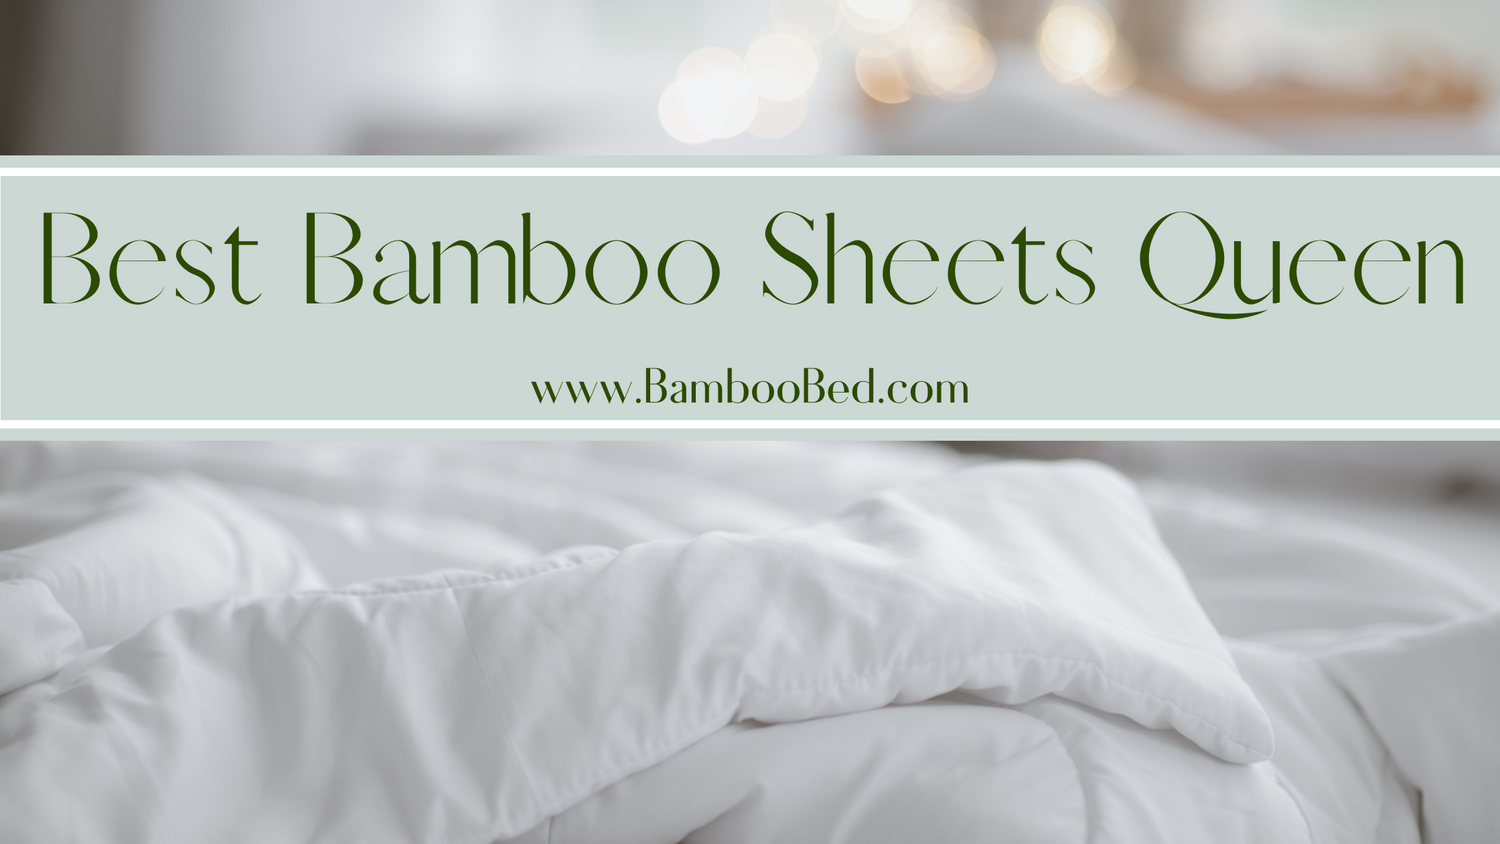 Couple of ladies decoring a bed with full size best bamboo sheets queen